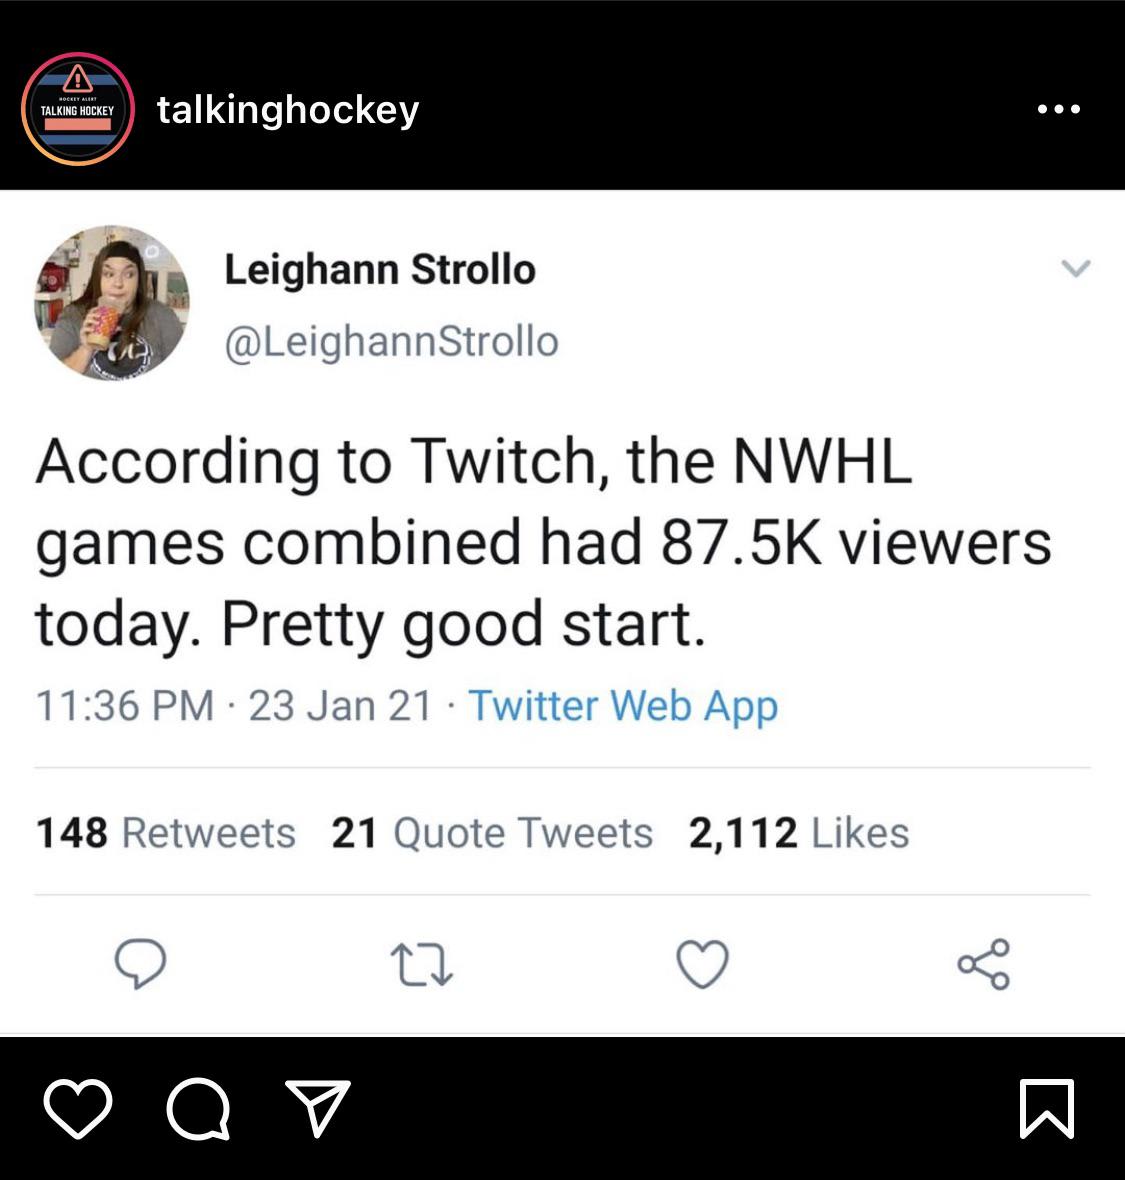 The NHL NEEDS to get on Twitch! They could reach an entire new audience overnight. Reaching new demos and gaining more attention is crucial!